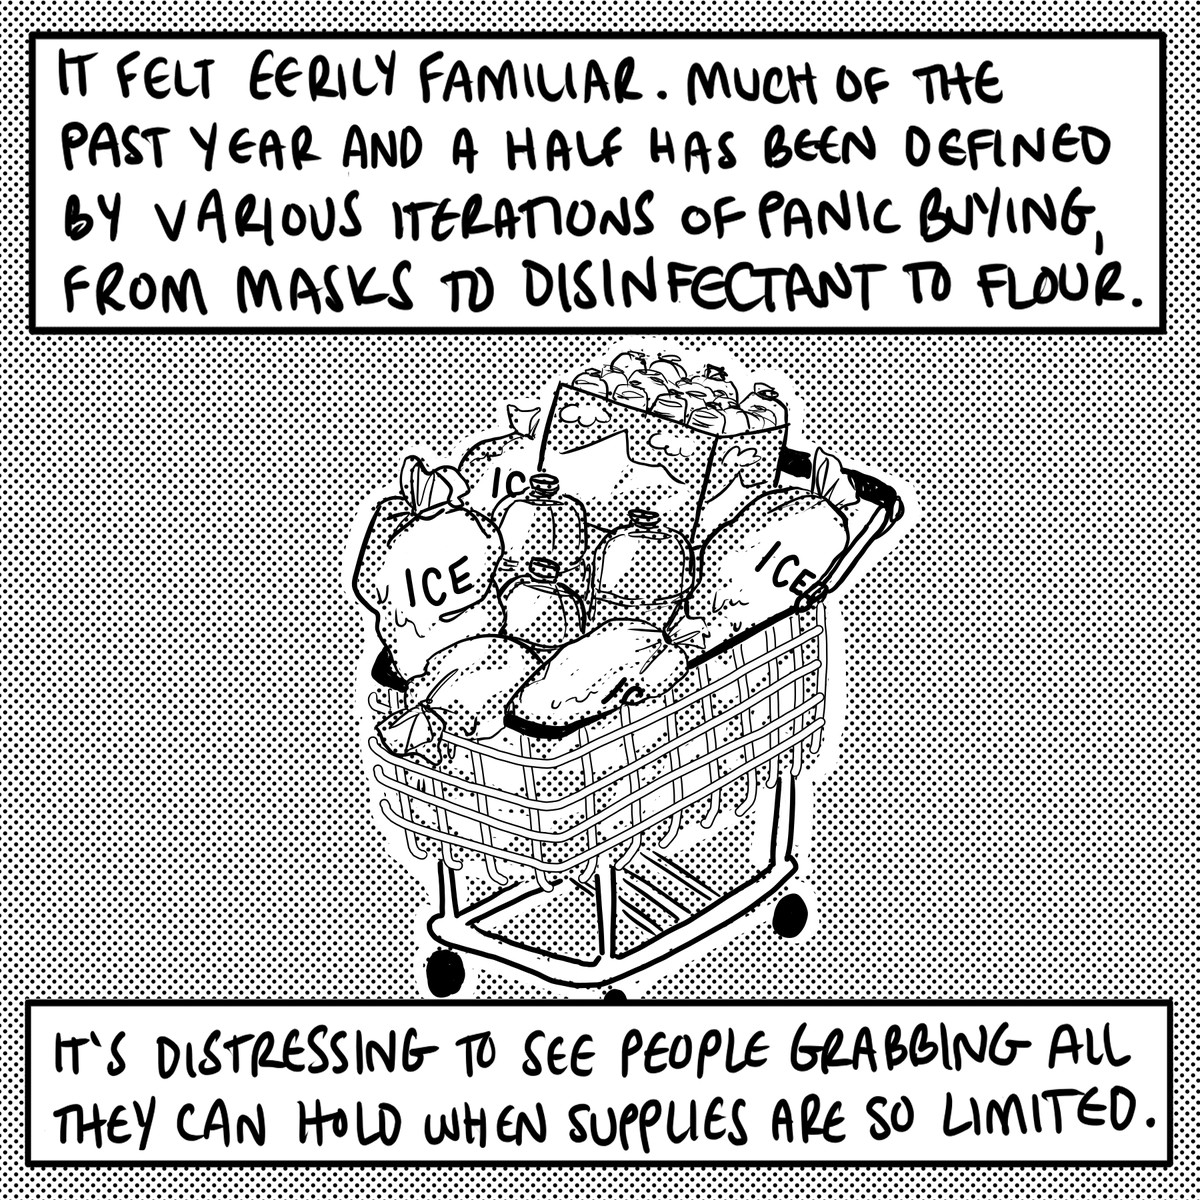 A shopping cart packed with bags of ice, large bottles of water, and a flat of small bottles of water. Text: “It felt eerily familiar. Much of the last year has been defined by various iterations of panic-buying, from masks to disinfectant to flour. It is distressing to see people grabbing all they can hold when supplies are so limited.”&nbsp;